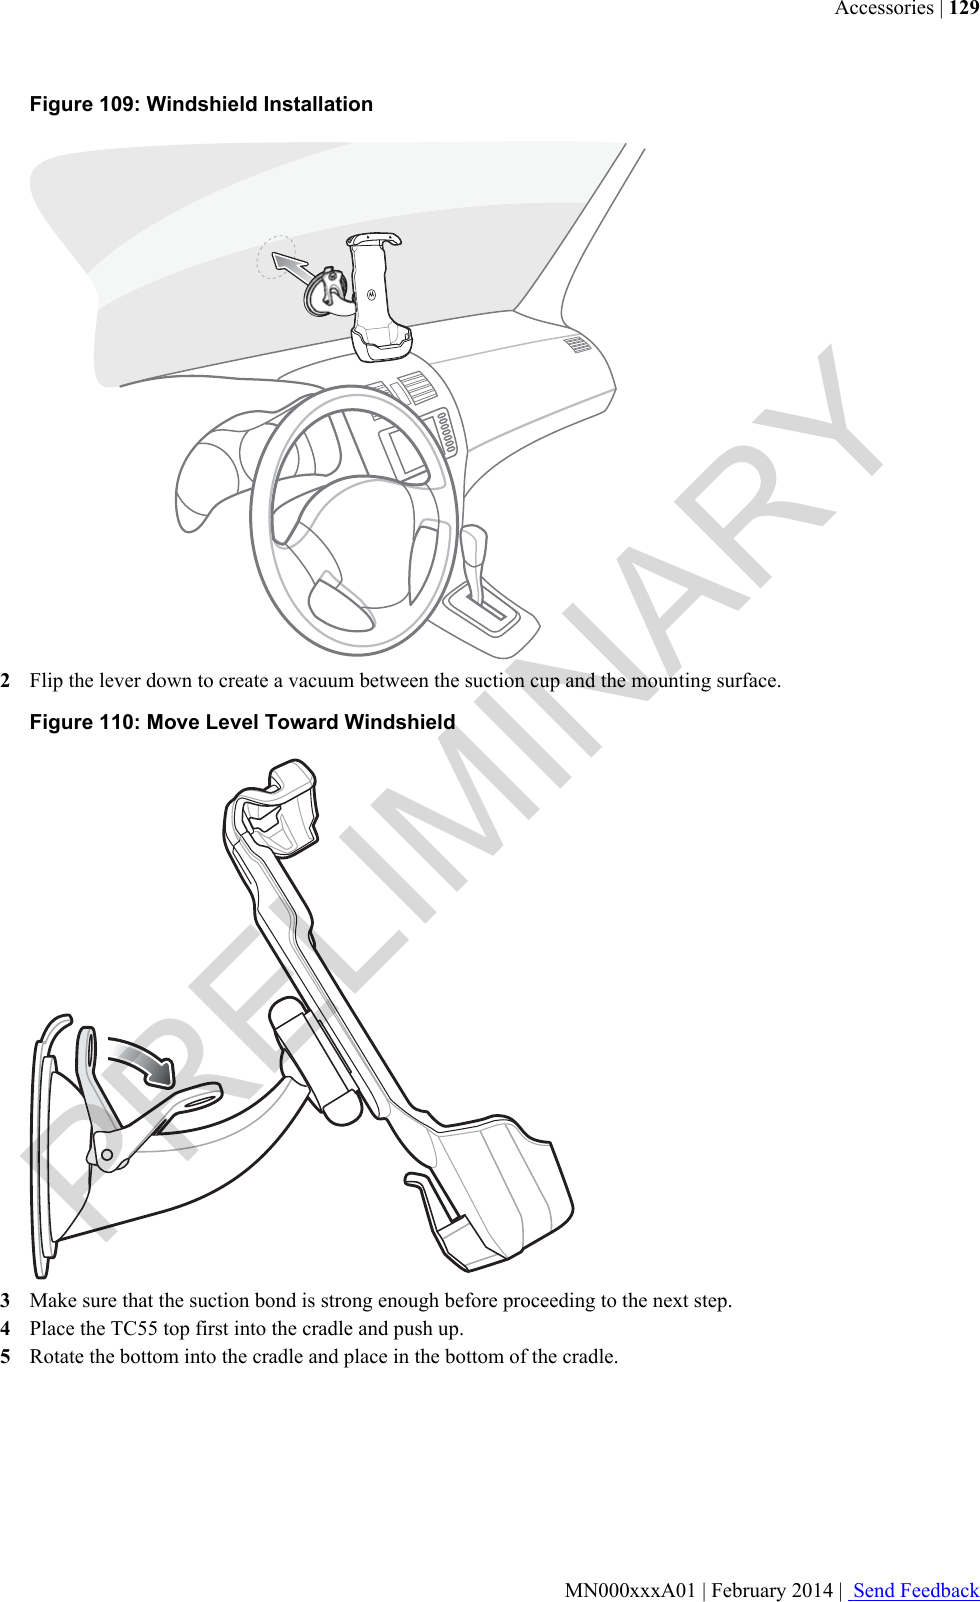 Figure 109: Windshield Installation2Flip the lever down to create a vacuum between the suction cup and the mounting surface.Figure 110: Move Level Toward Windshield3Make sure that the suction bond is strong enough before proceeding to the next step.4Place the TC55 top first into the cradle and push up.5Rotate the bottom into the cradle and place in the bottom of the cradle.Accessories | 129MN000xxxA01 | February 2014 |  Send FeedbackPRELIMINARY